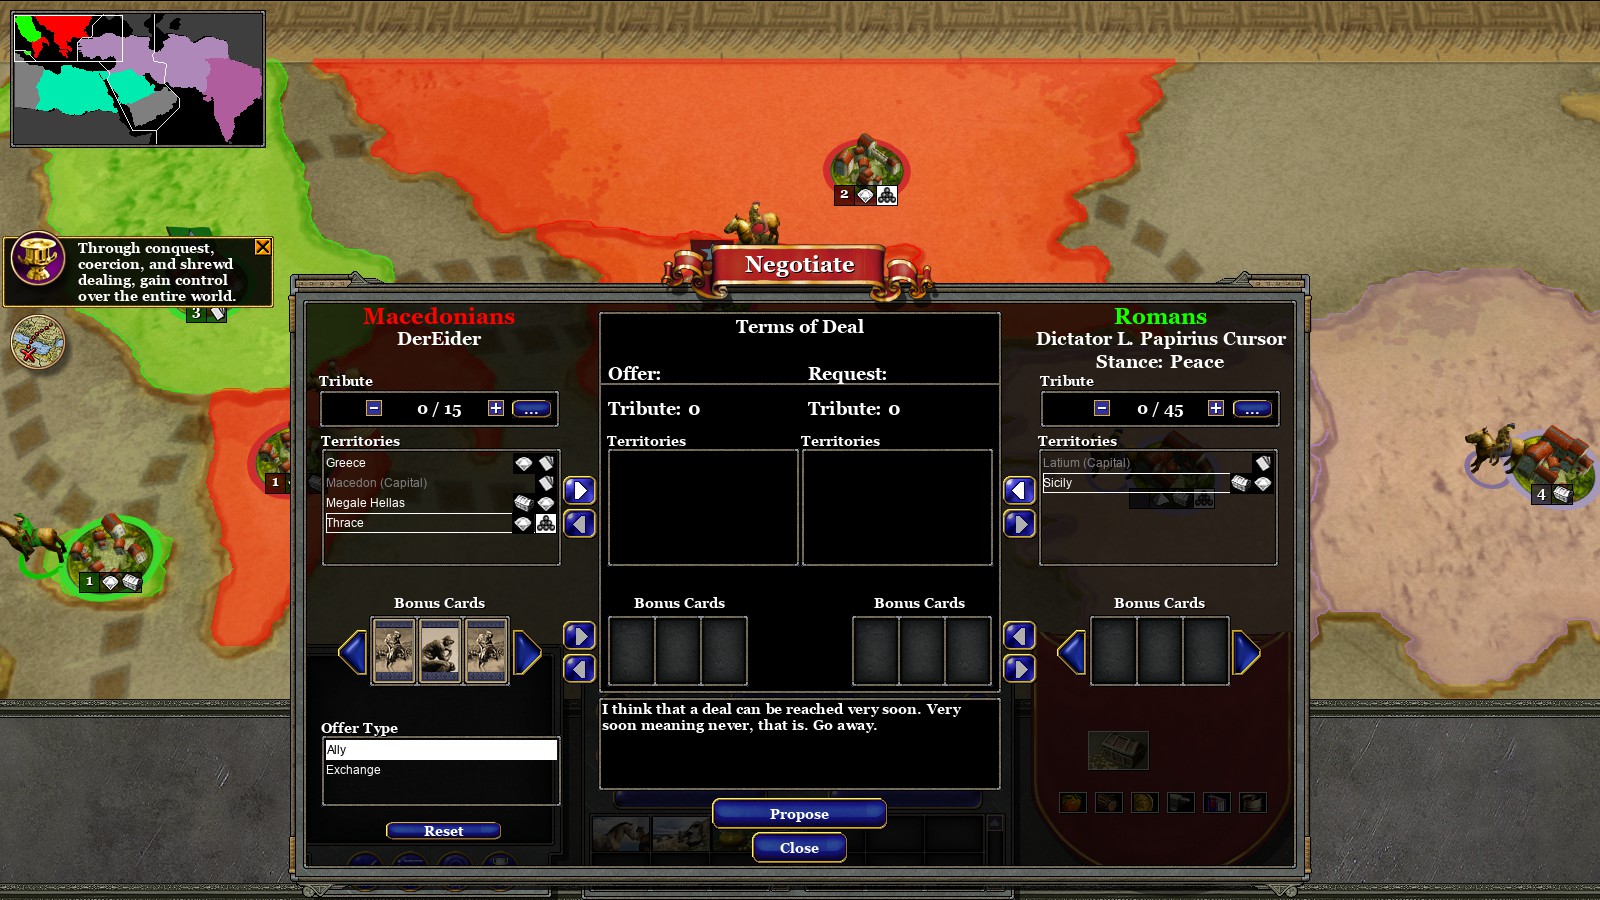 download free rise of nations steel